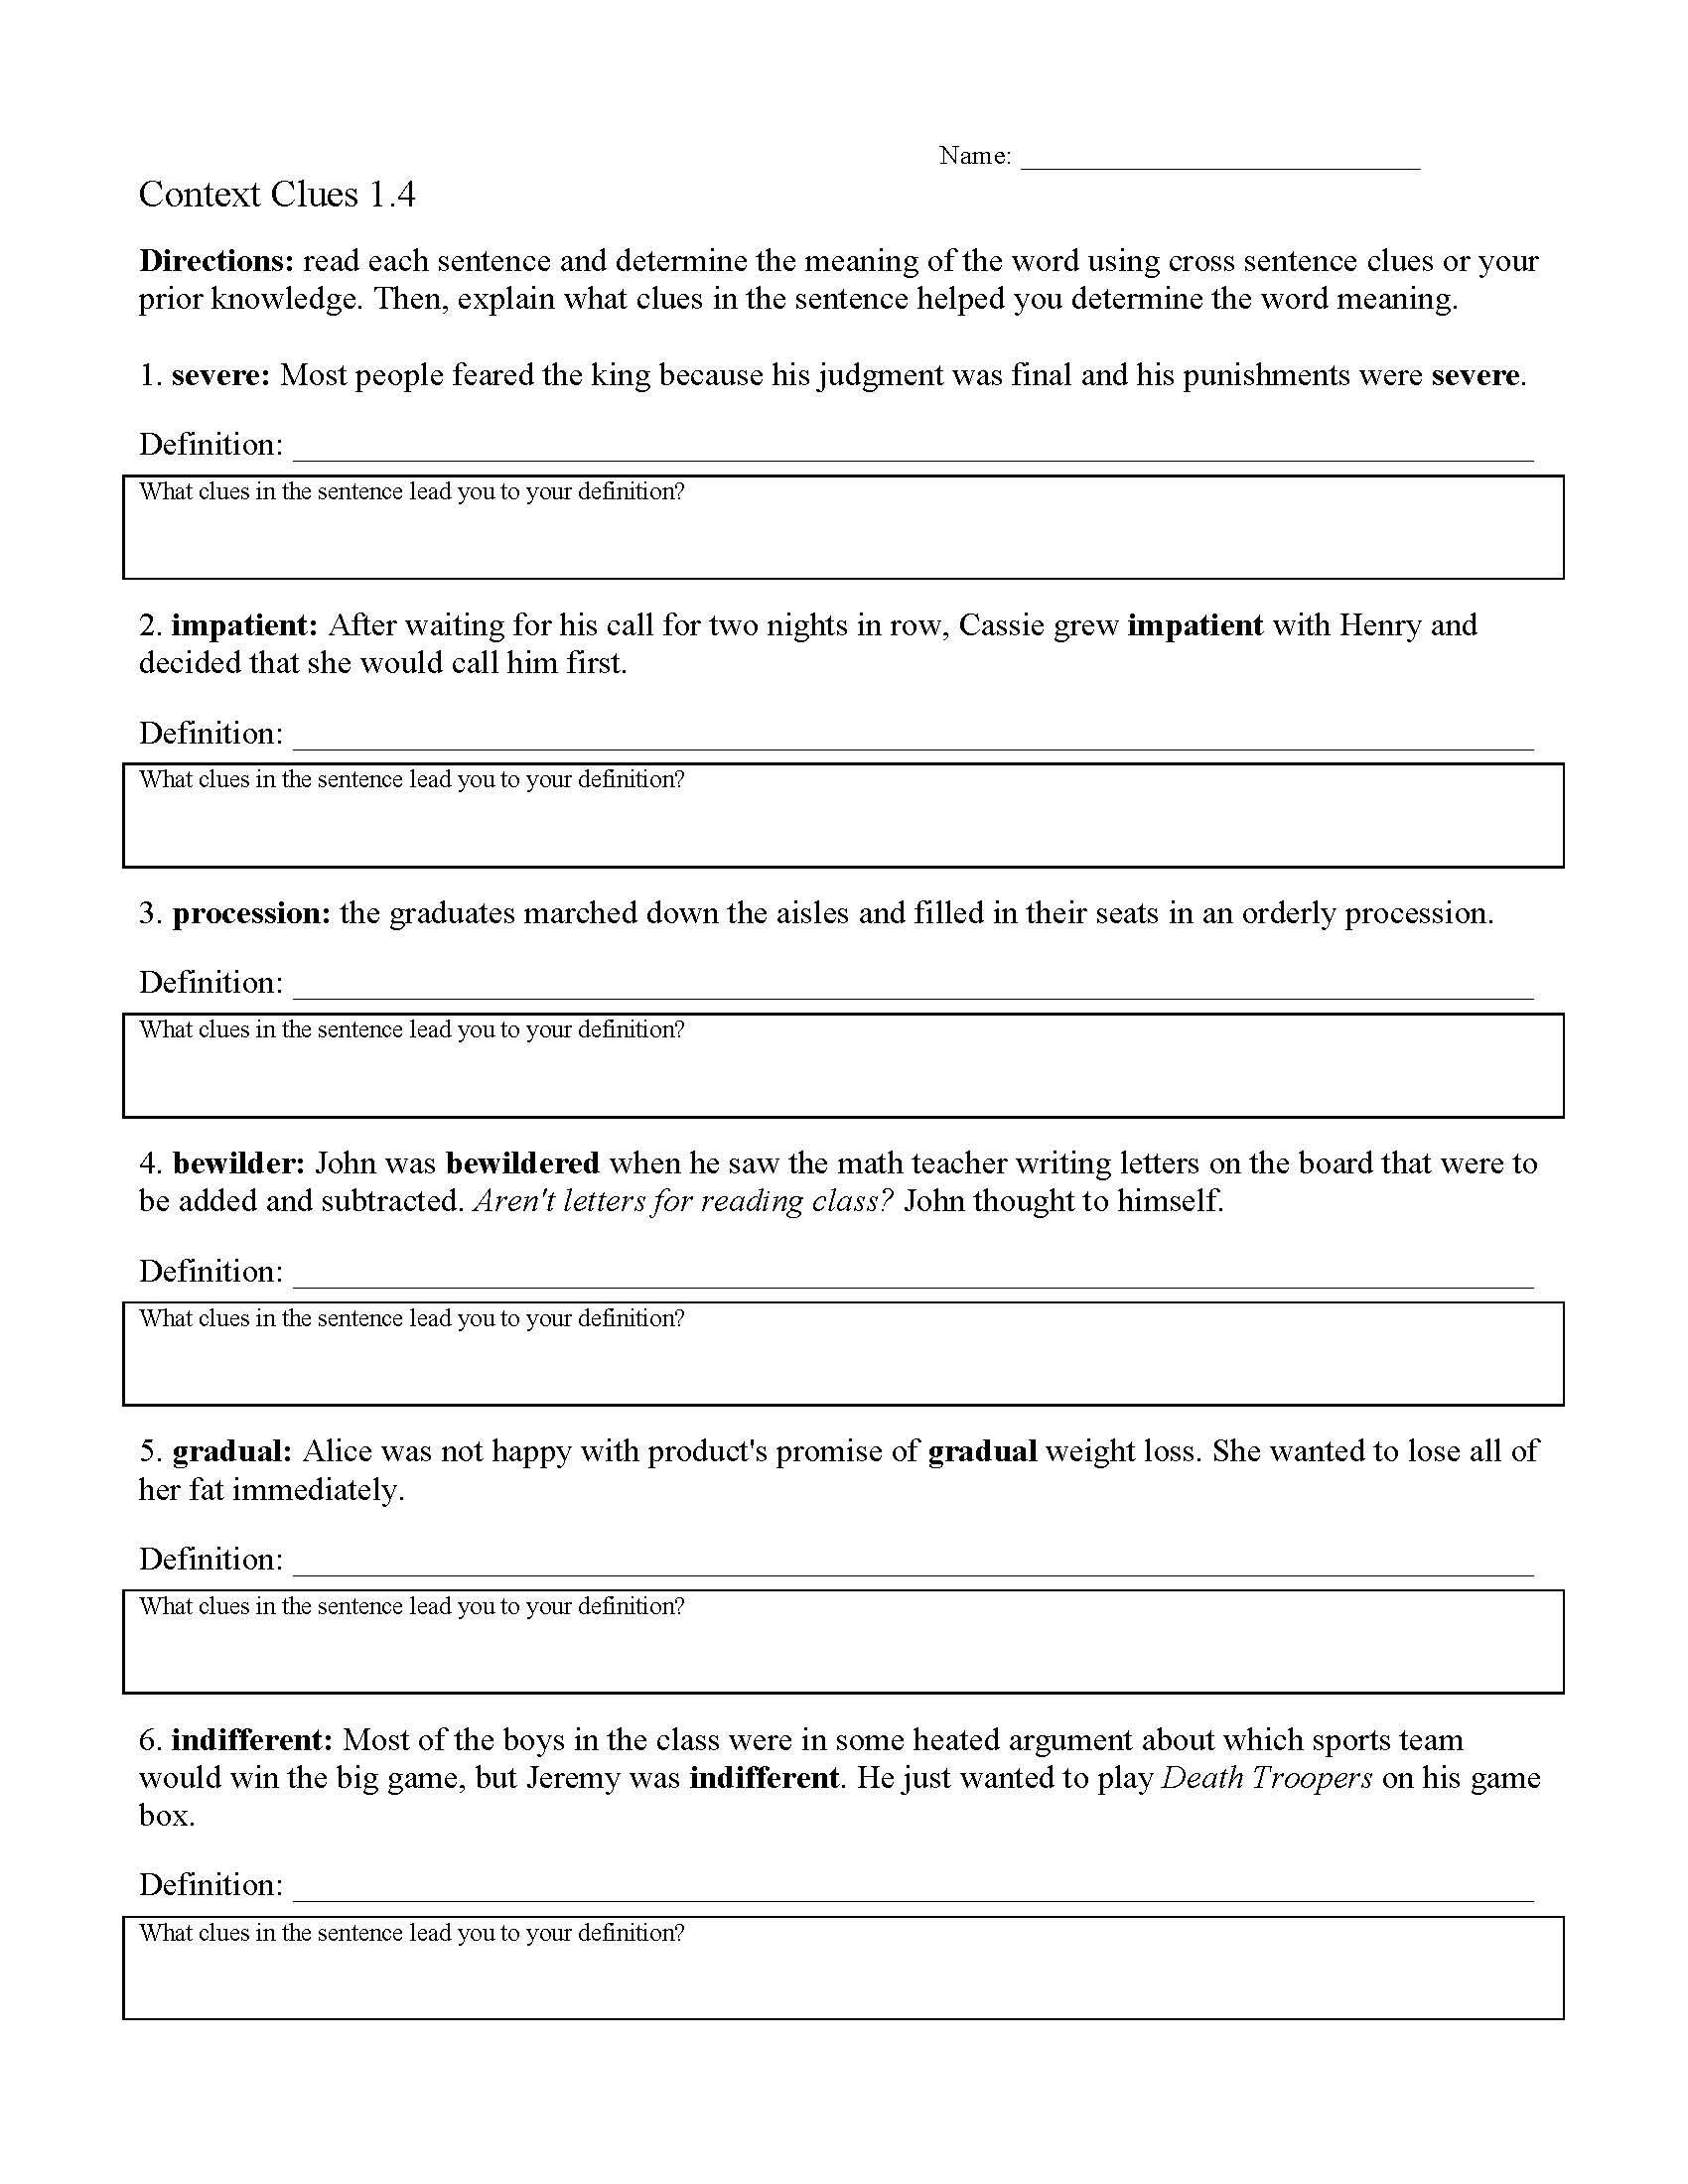 This is a preview image of Context Clues Worksheet 1.4. Click on it to enlarge it or view the source file.